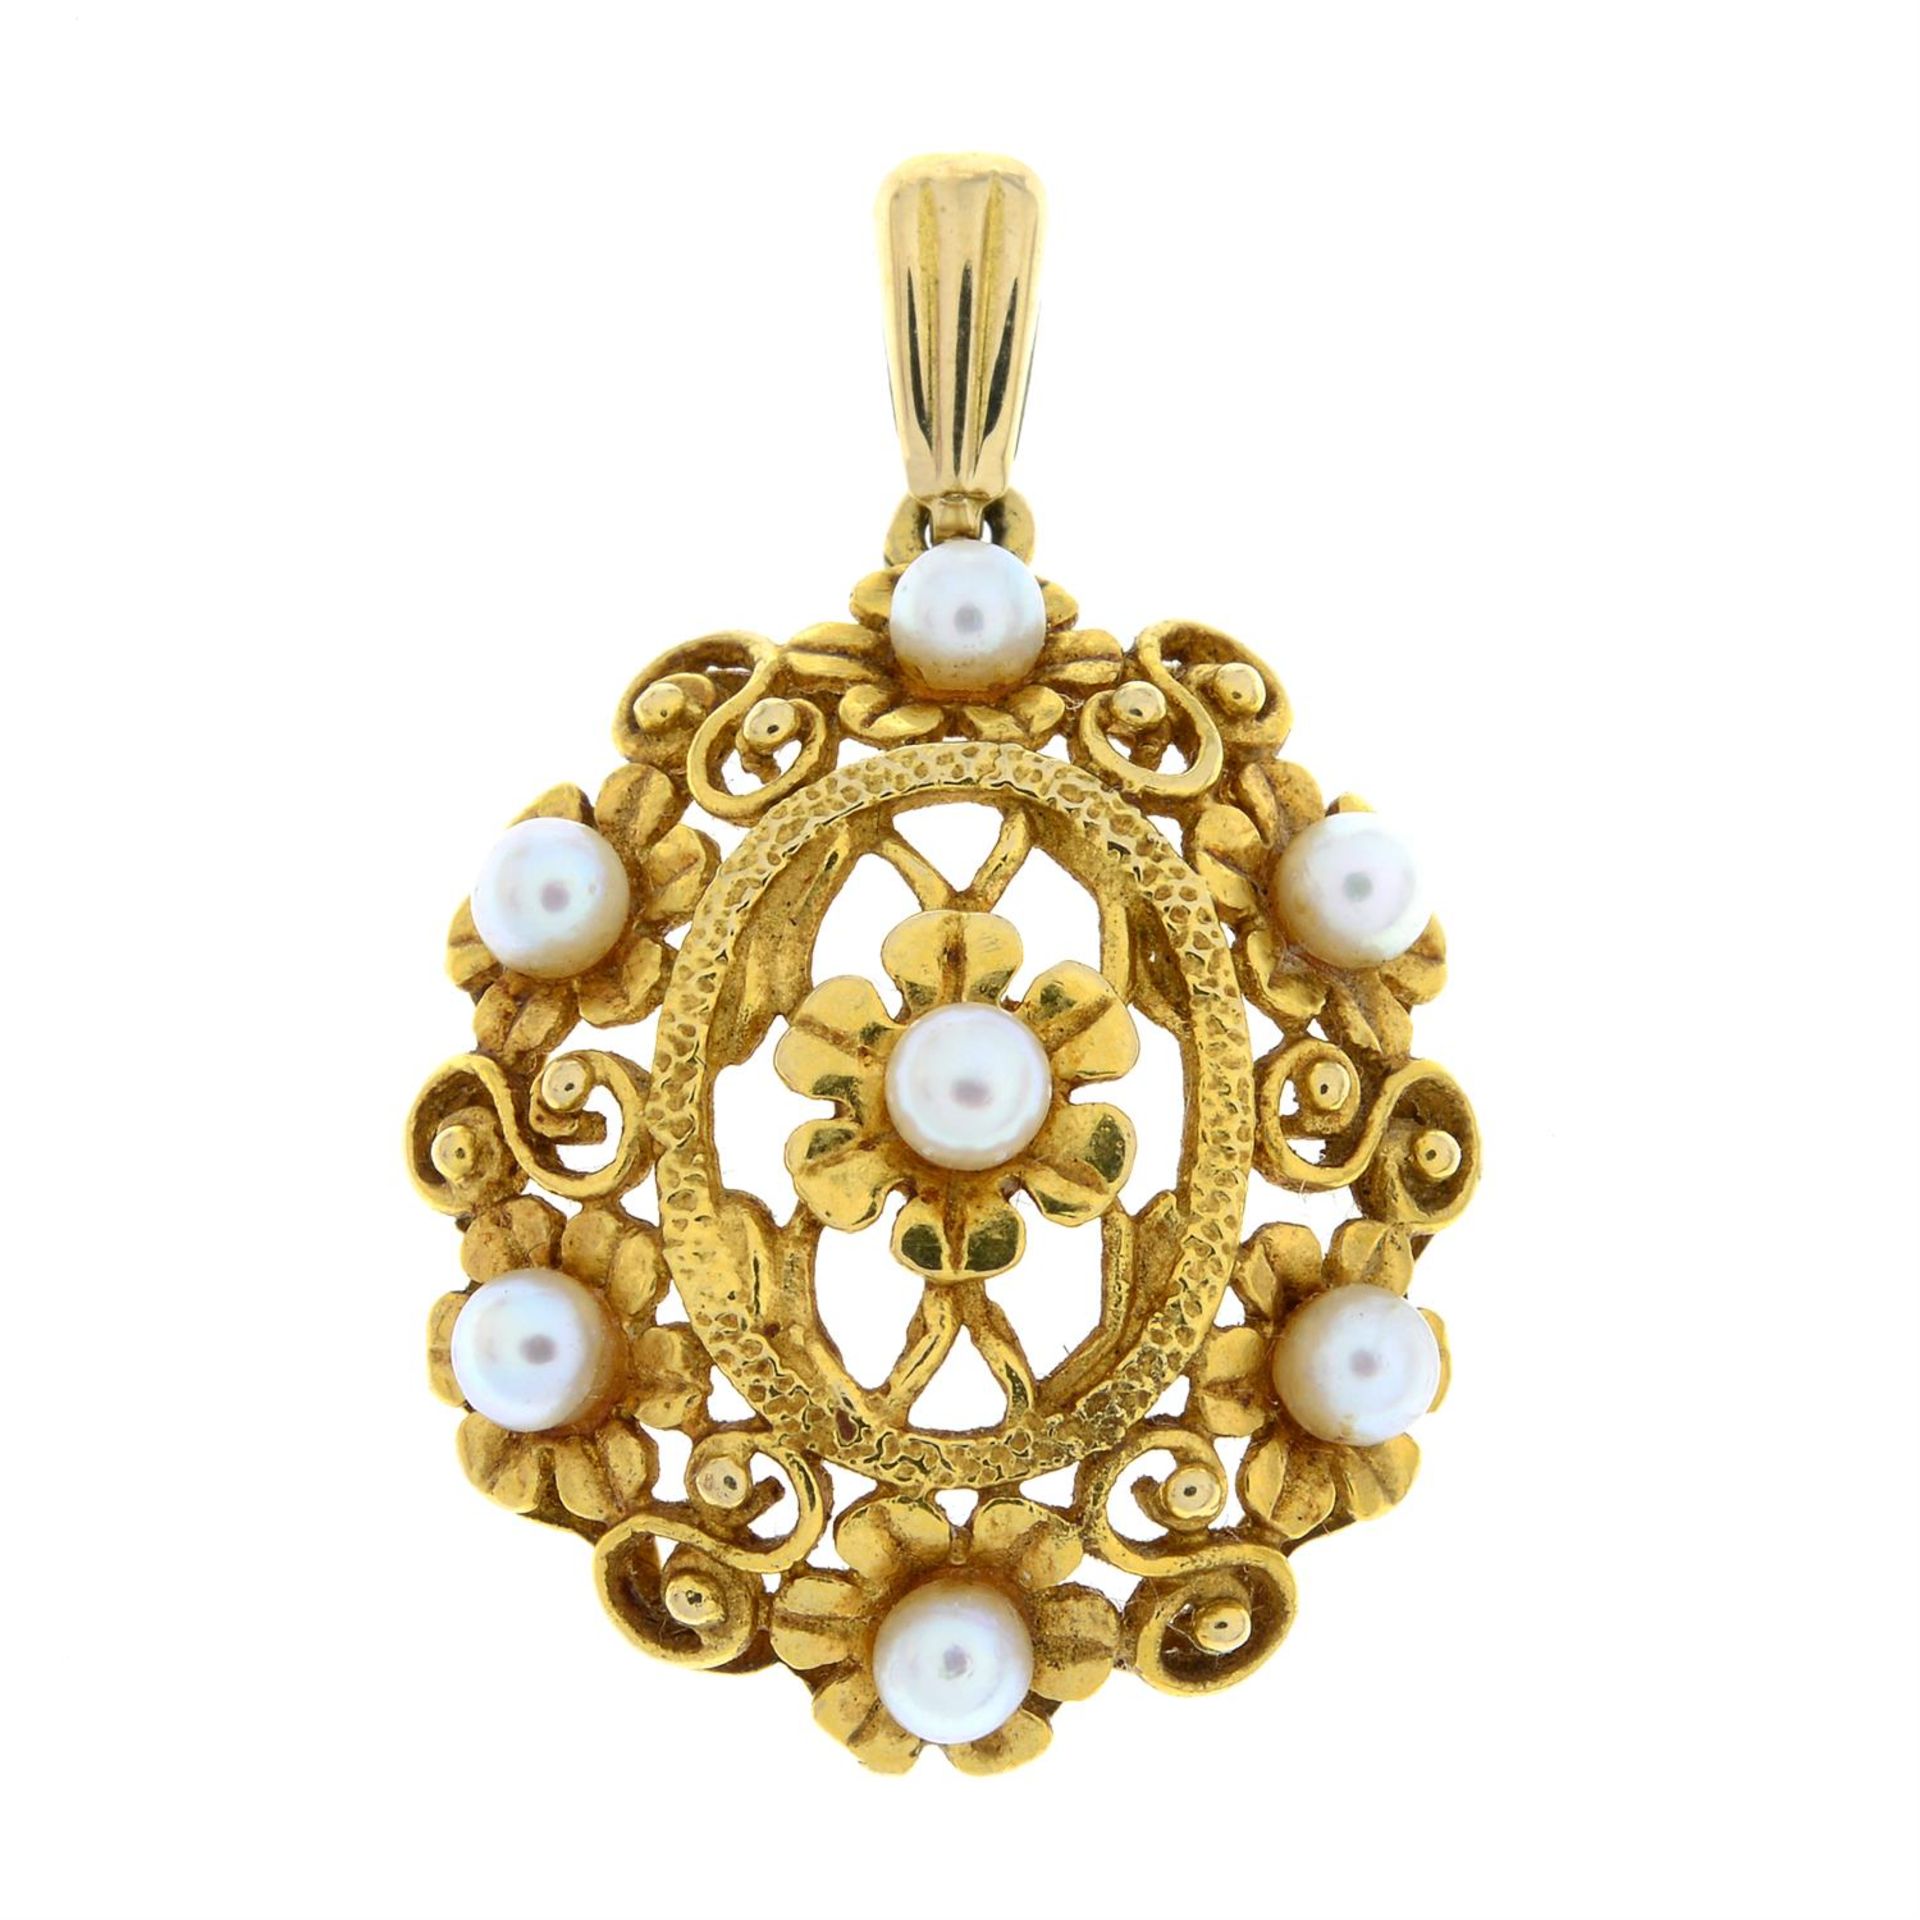 A 9ct gold seed pearl pendant.